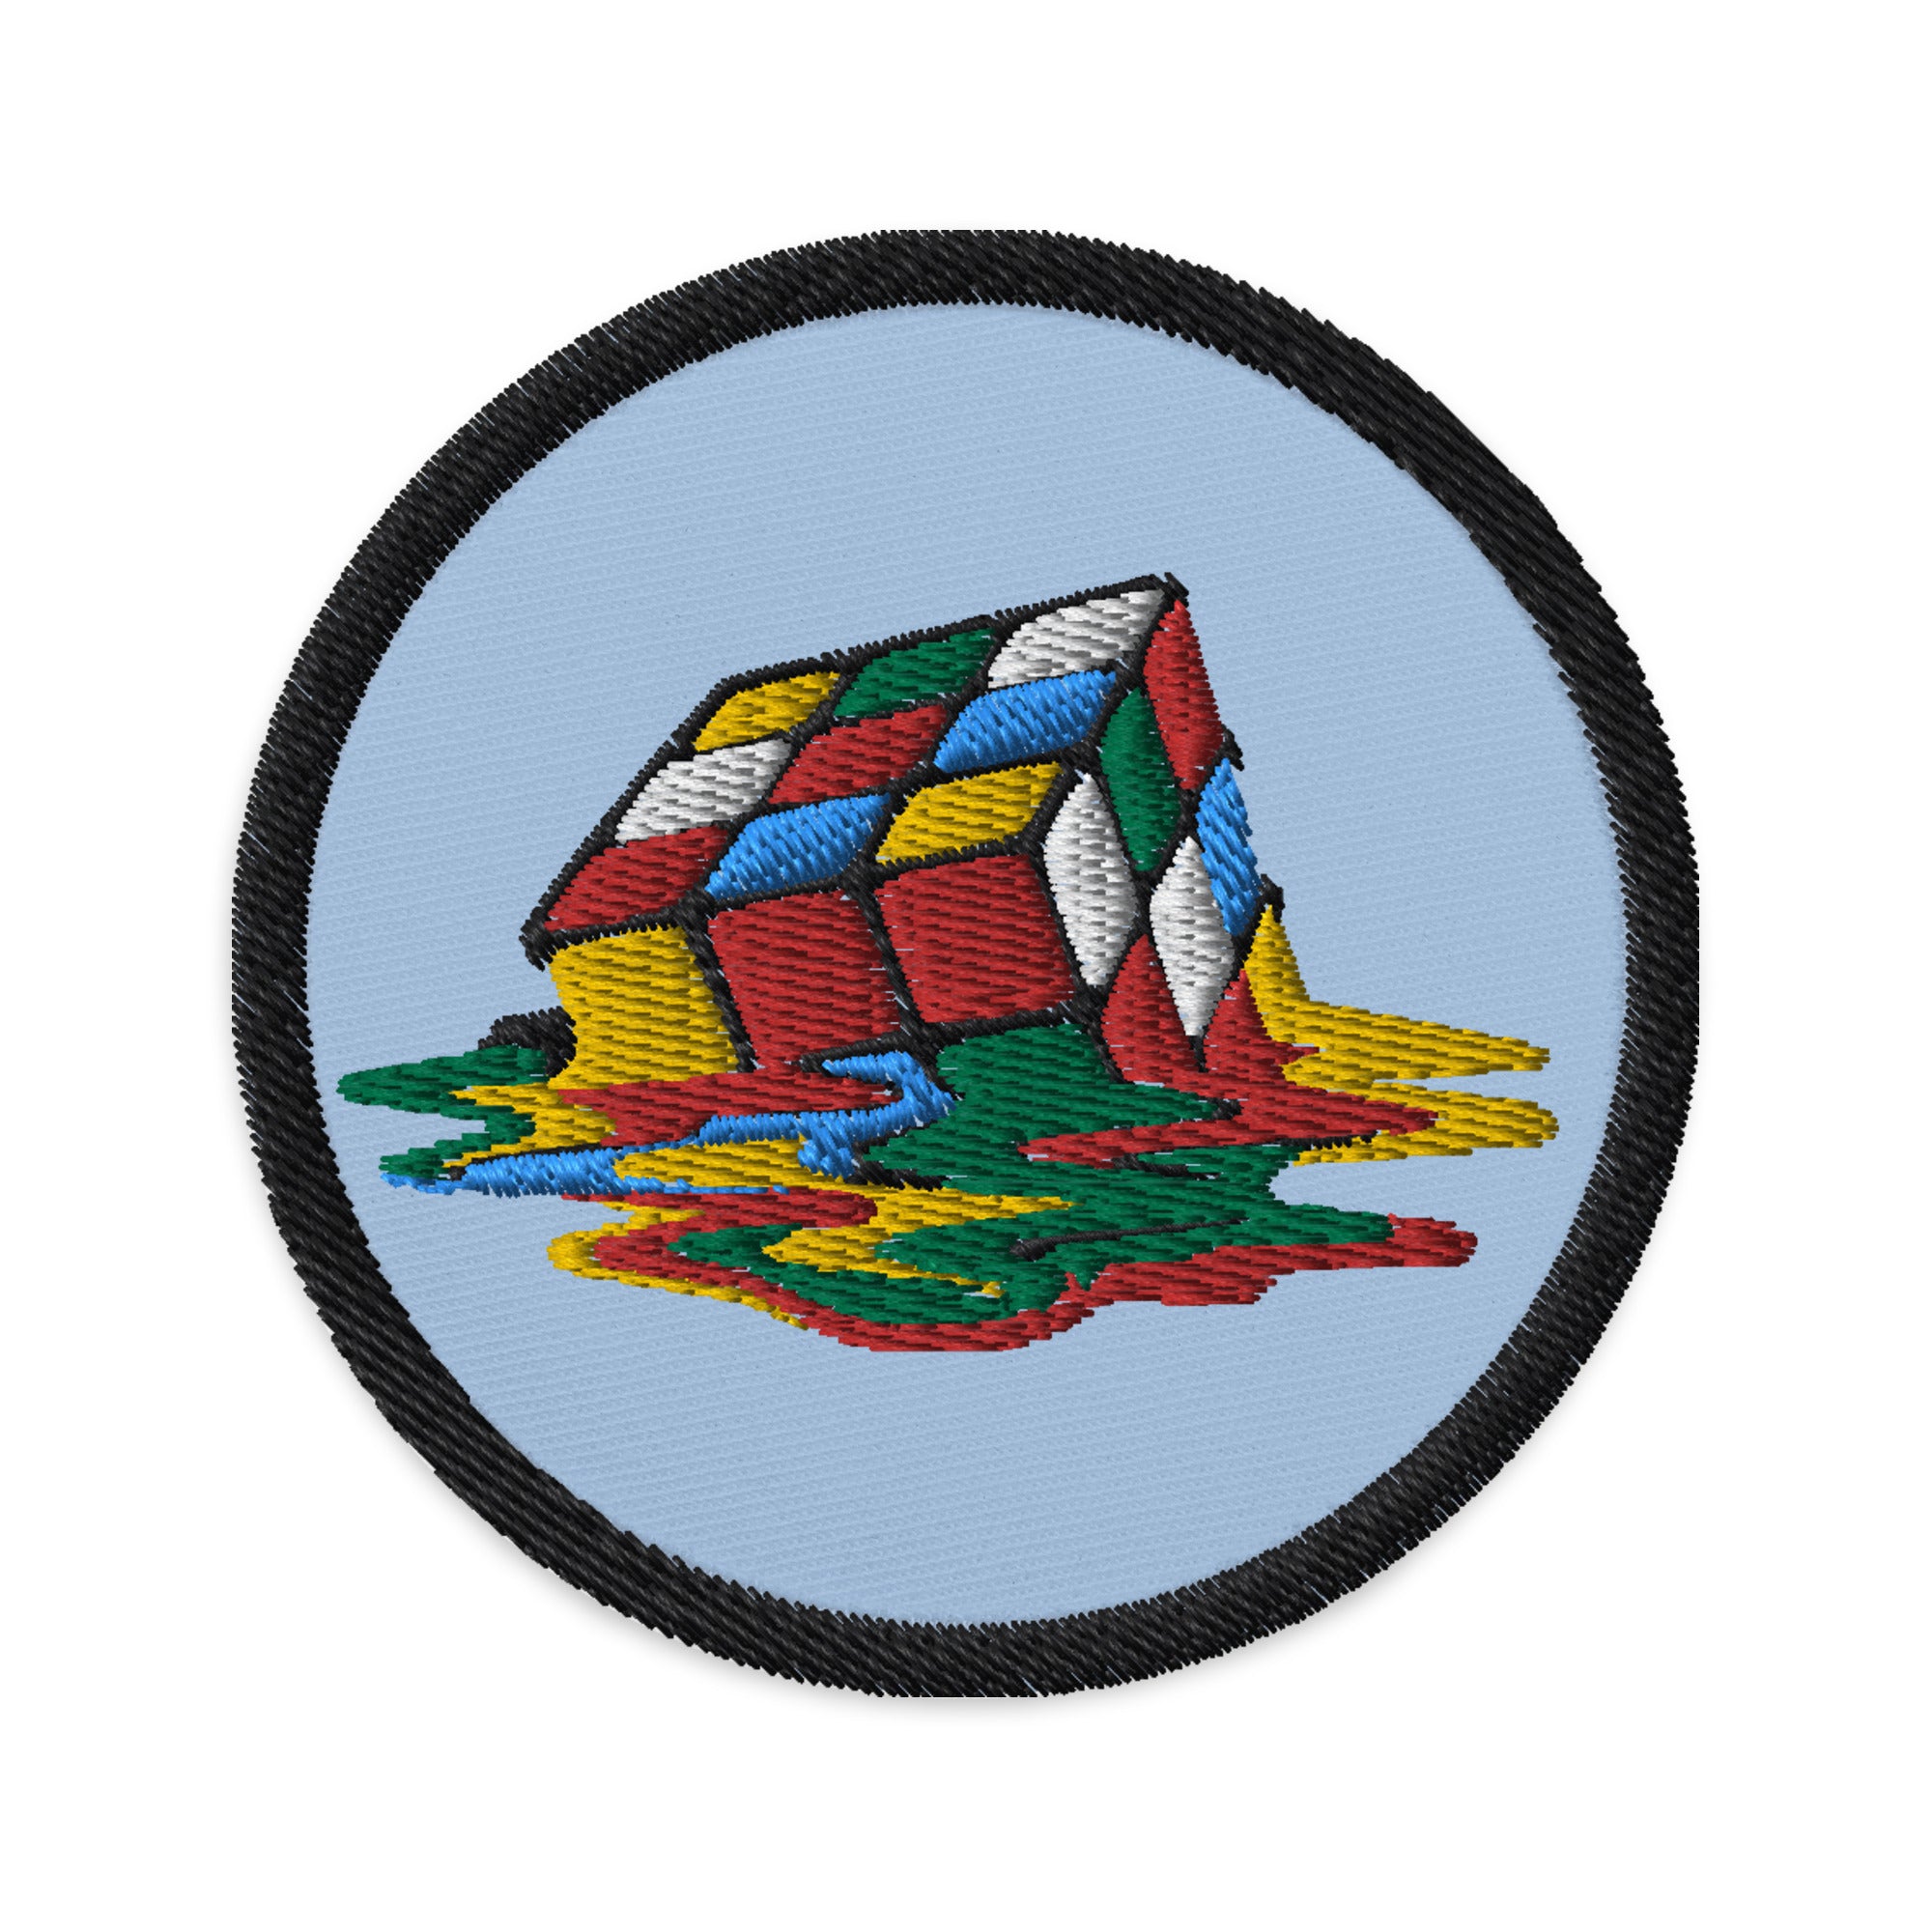 Melting Speed Cube Gaming Puzzle Box Embroidered Patch Rubik's Cube - Edge of Life Designs